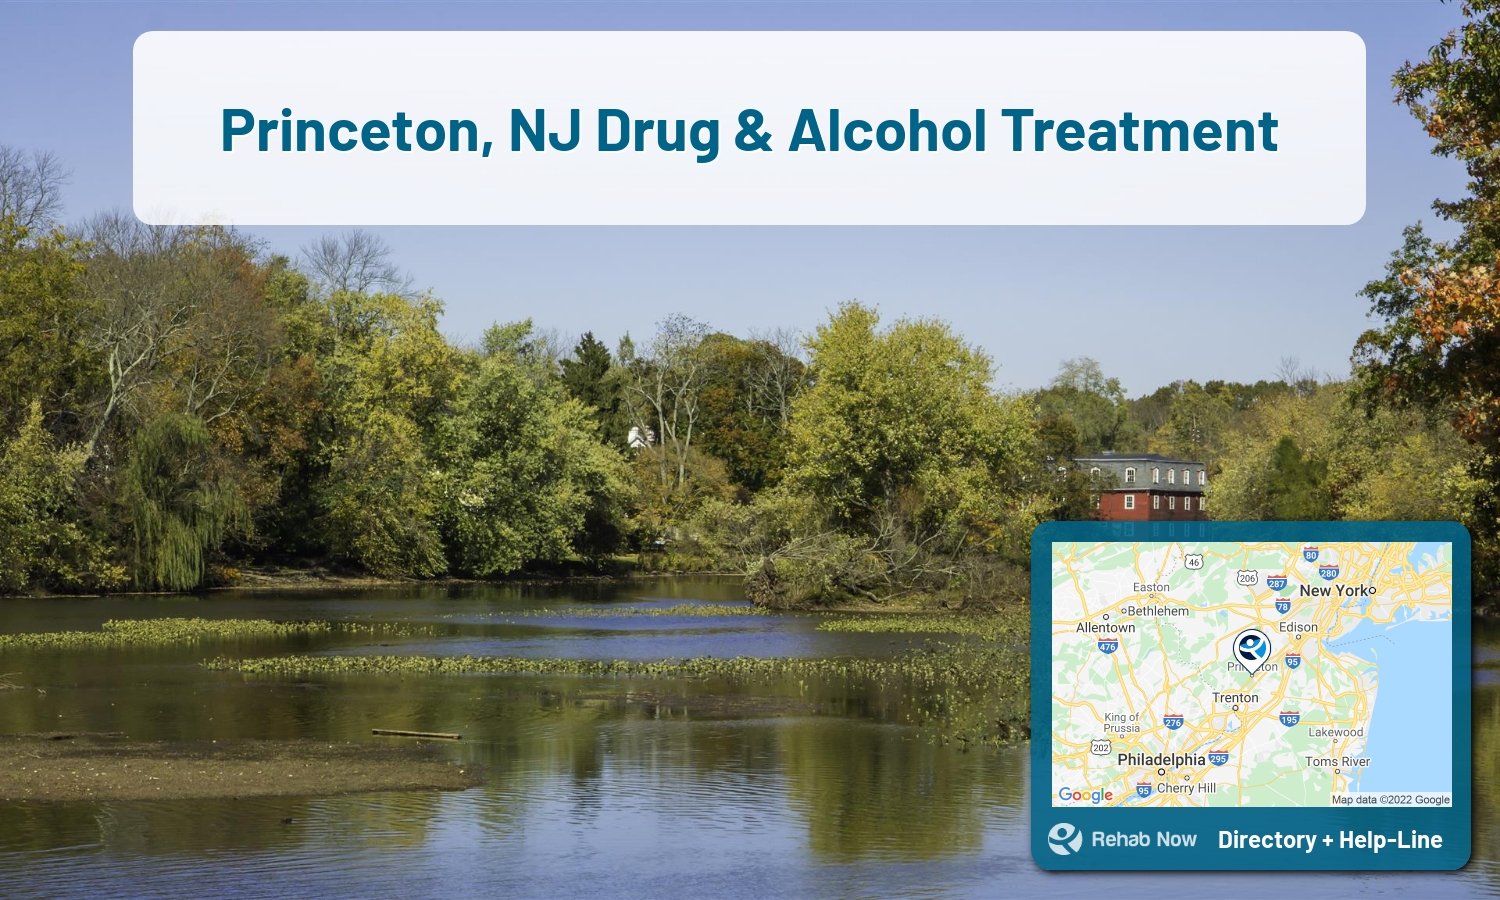 Ready to pick a rehab center in Princeton? Get off alcohol, opiates, and other drugs, by selecting top drug rehab centers in New Jersey